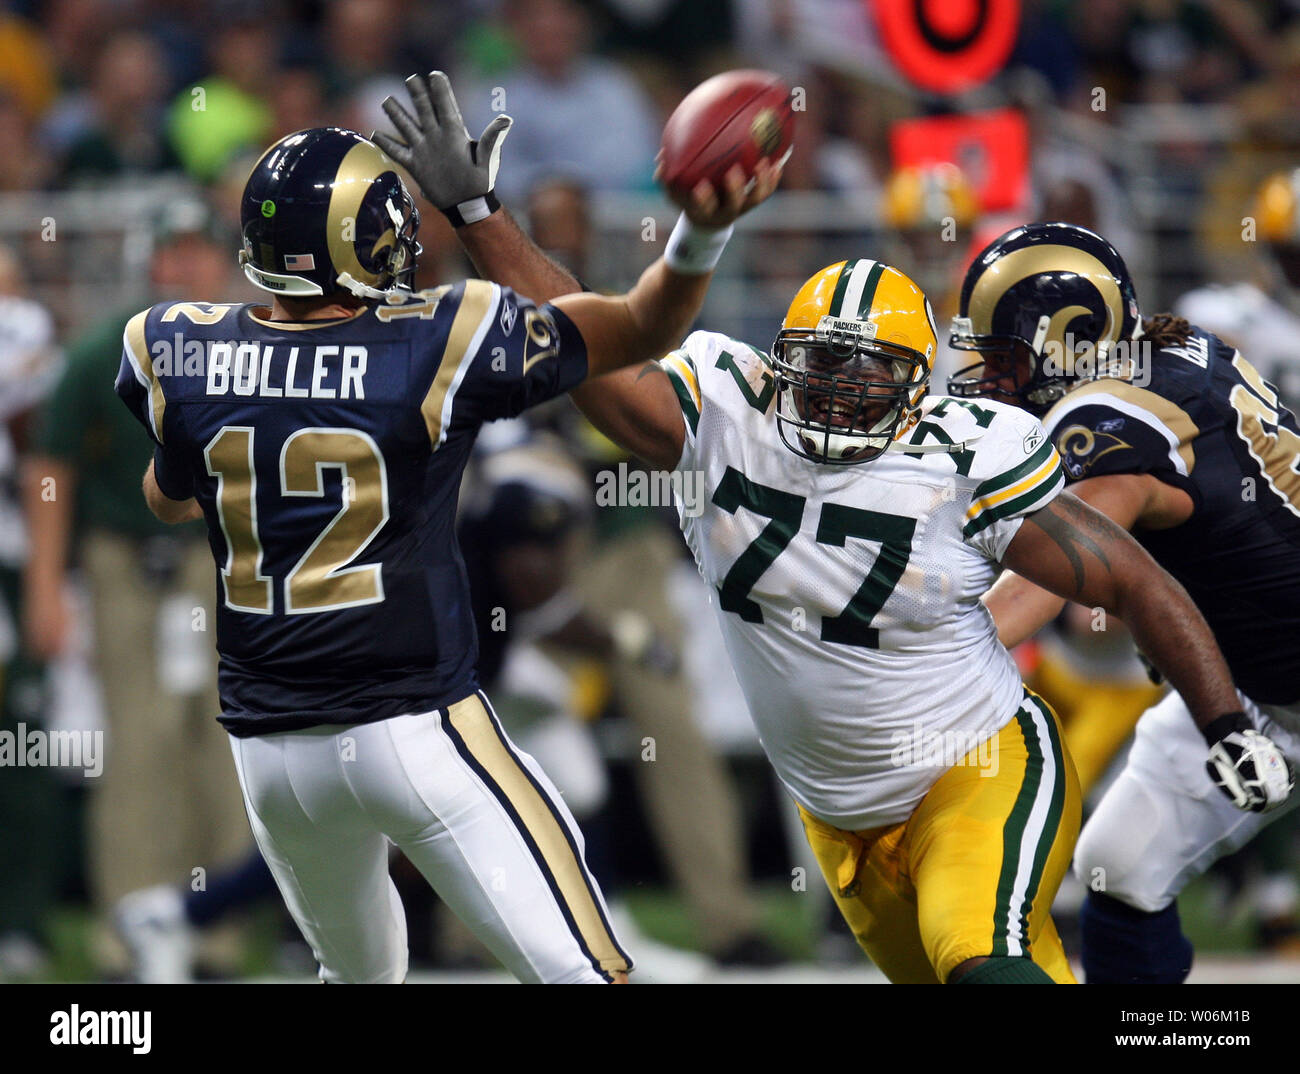 Green Bay Packers Cullen Jenkins (77) pressures St. Louis Rams quarterback Kyle Boller during the fourth quarter at the Edward Jones Dome in St. Louis on September 27, 2009. Green Bay won the game 36-17.   UPI/Bill Greenblatt Stock Photo